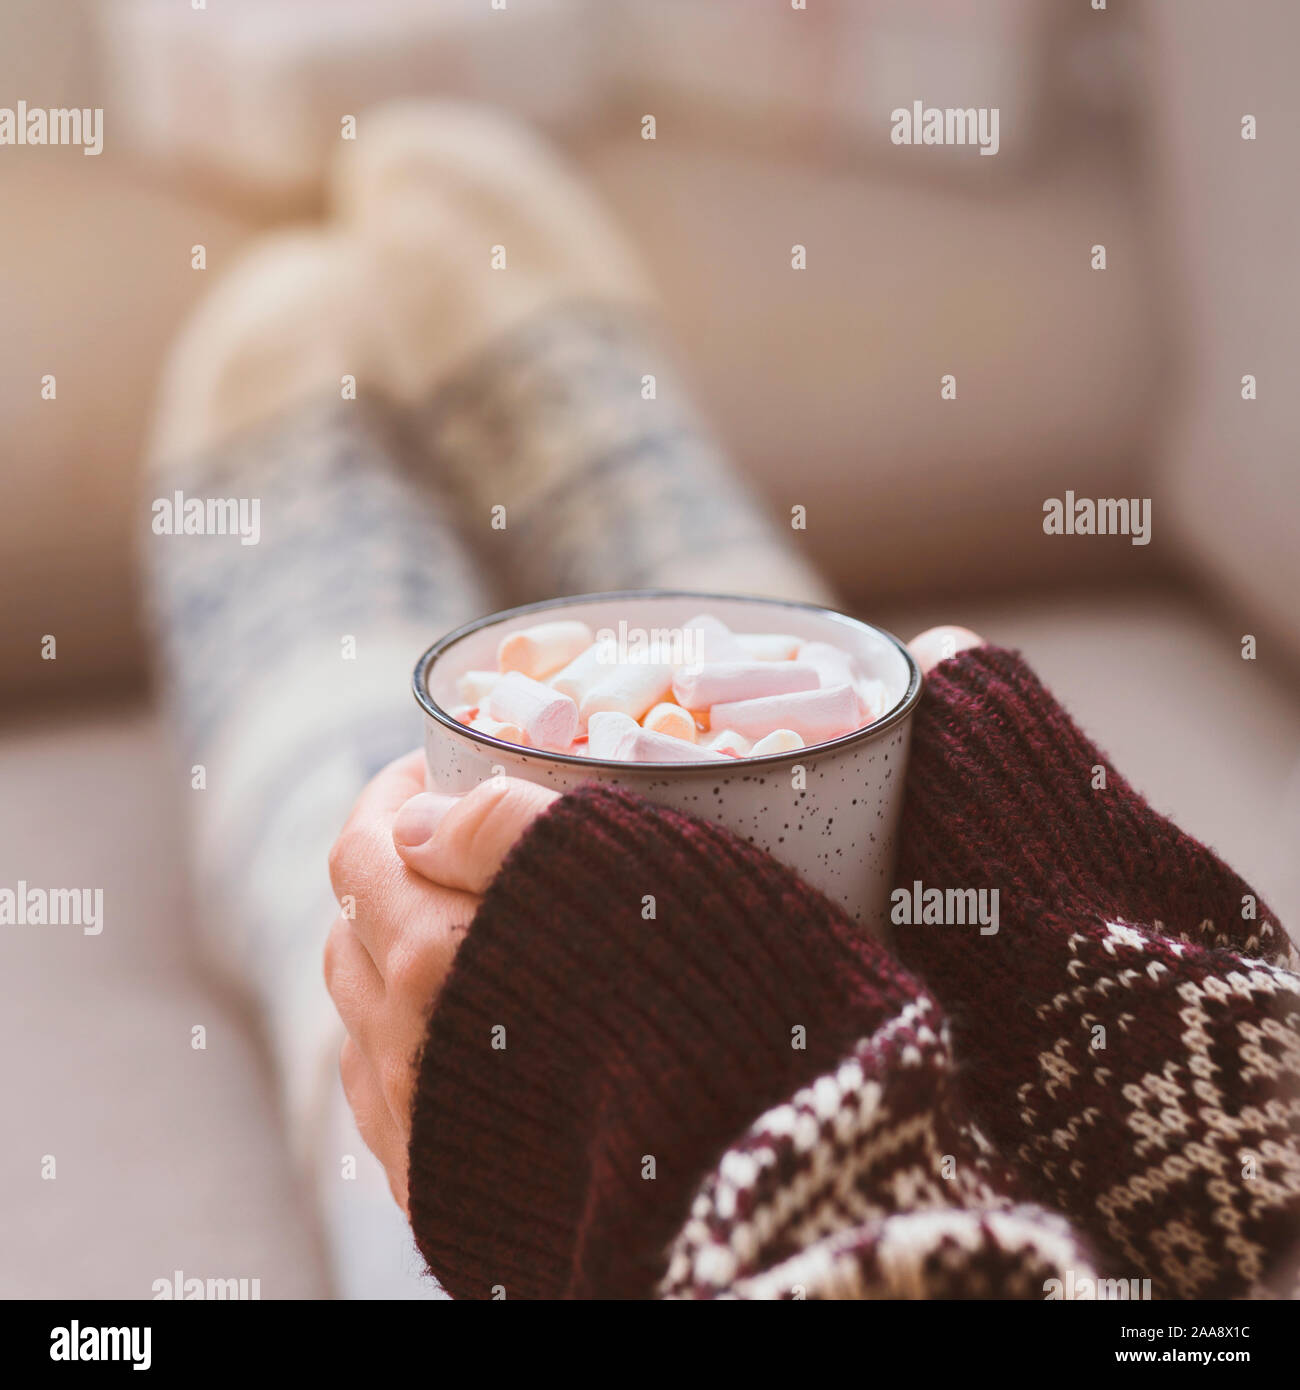 Woman in warm sweater with patterns and funny socks drinking hot chocolate Stock Photo